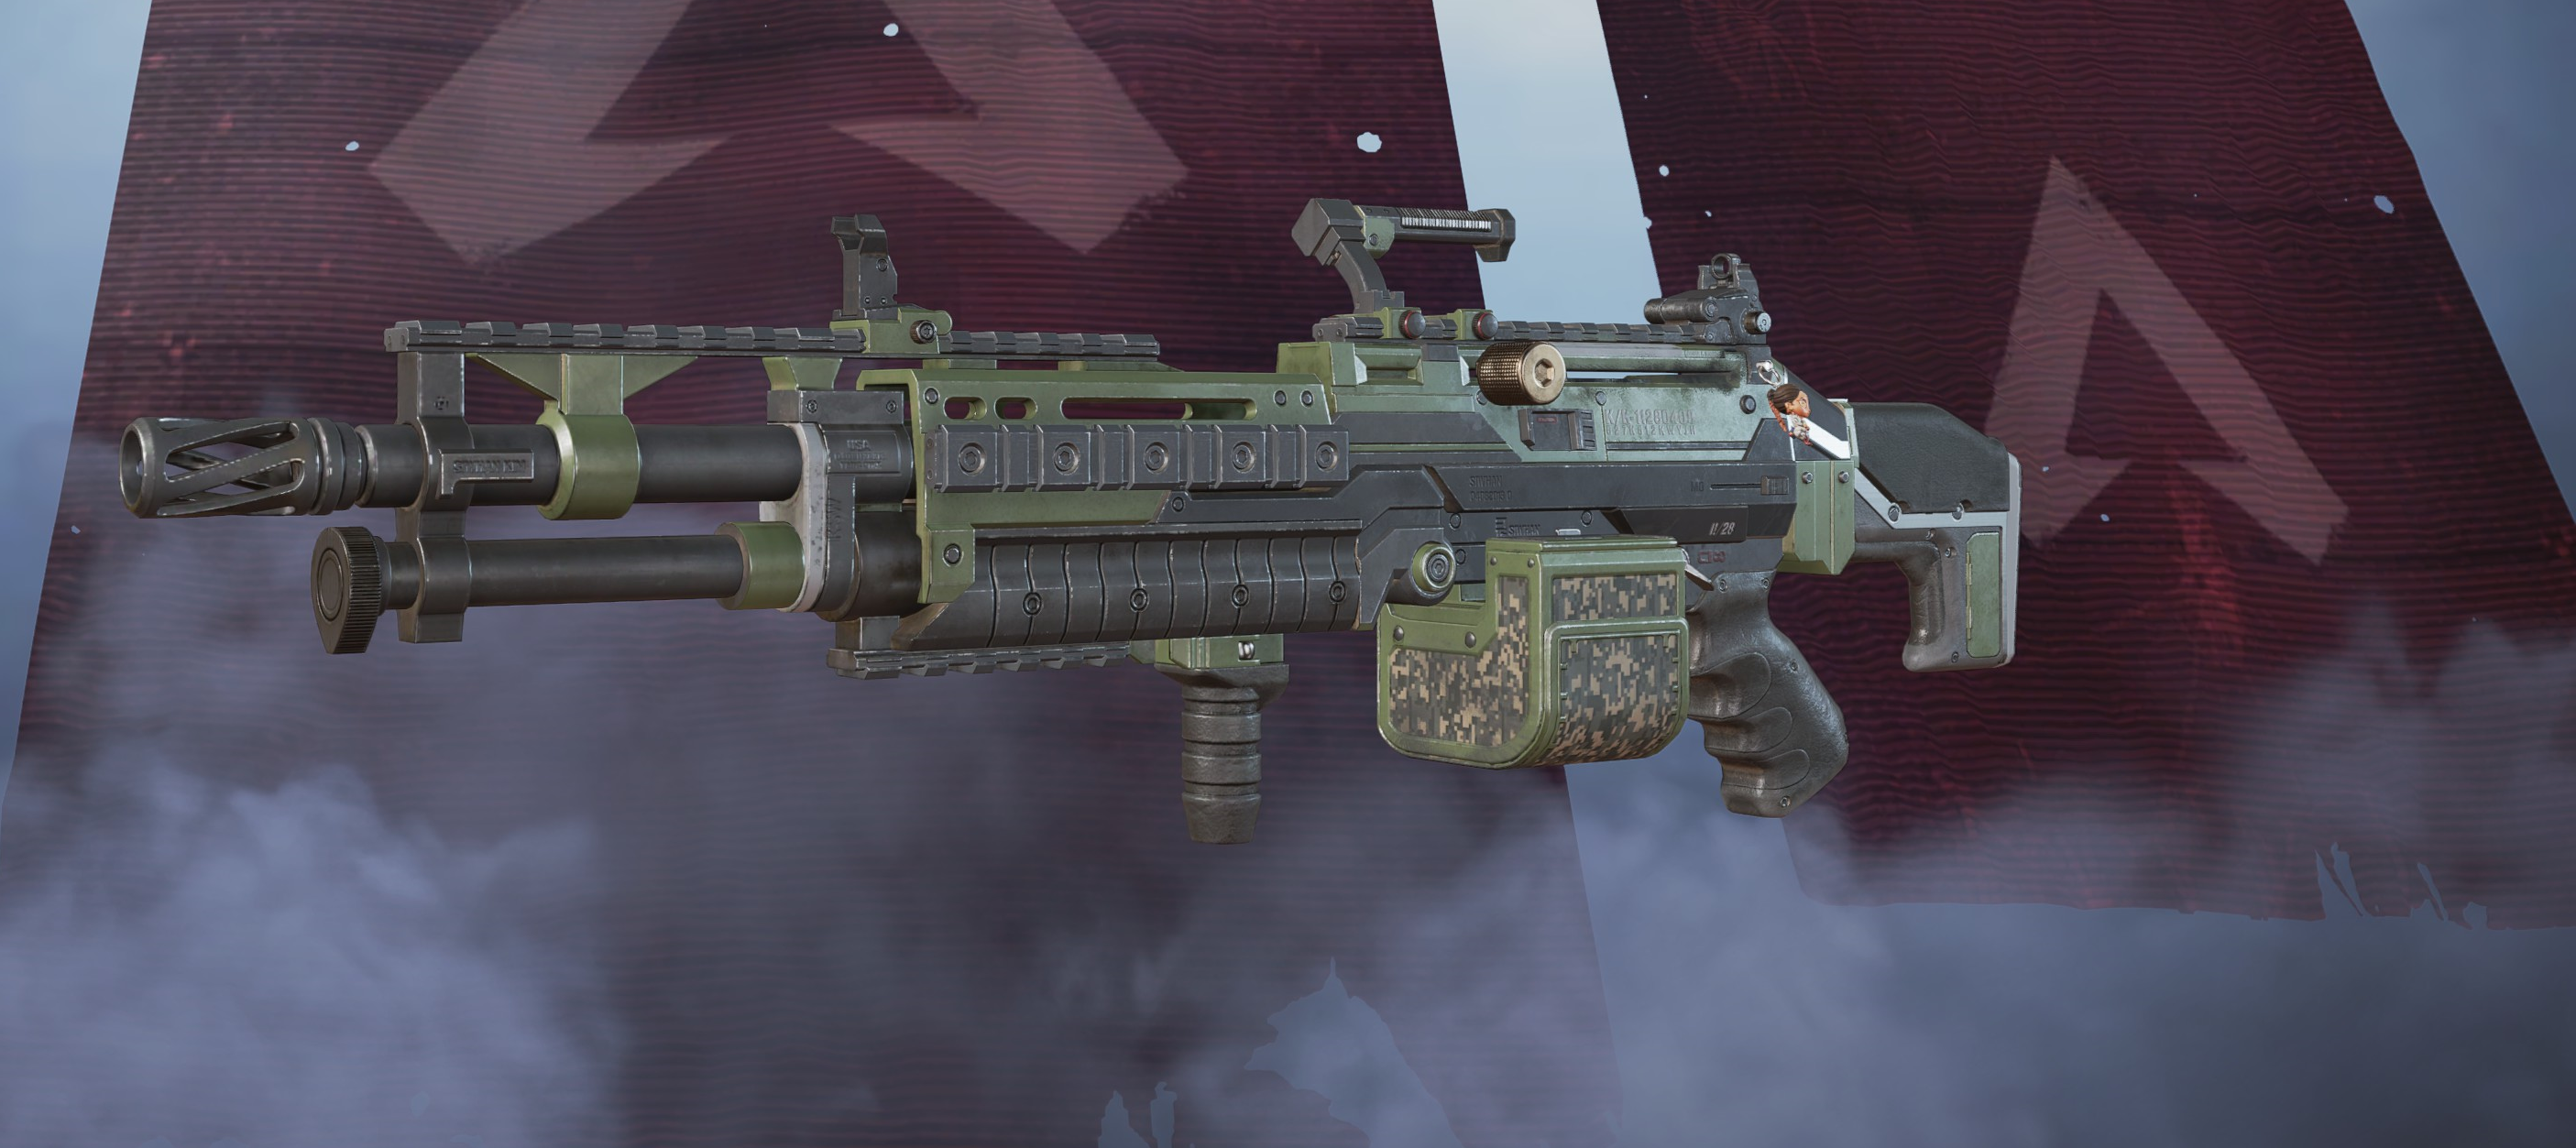 Spitfire And Alternator Move To Care Package Prowler Returns To Floor Loot In Apex Legends Season 10 Dot Esports